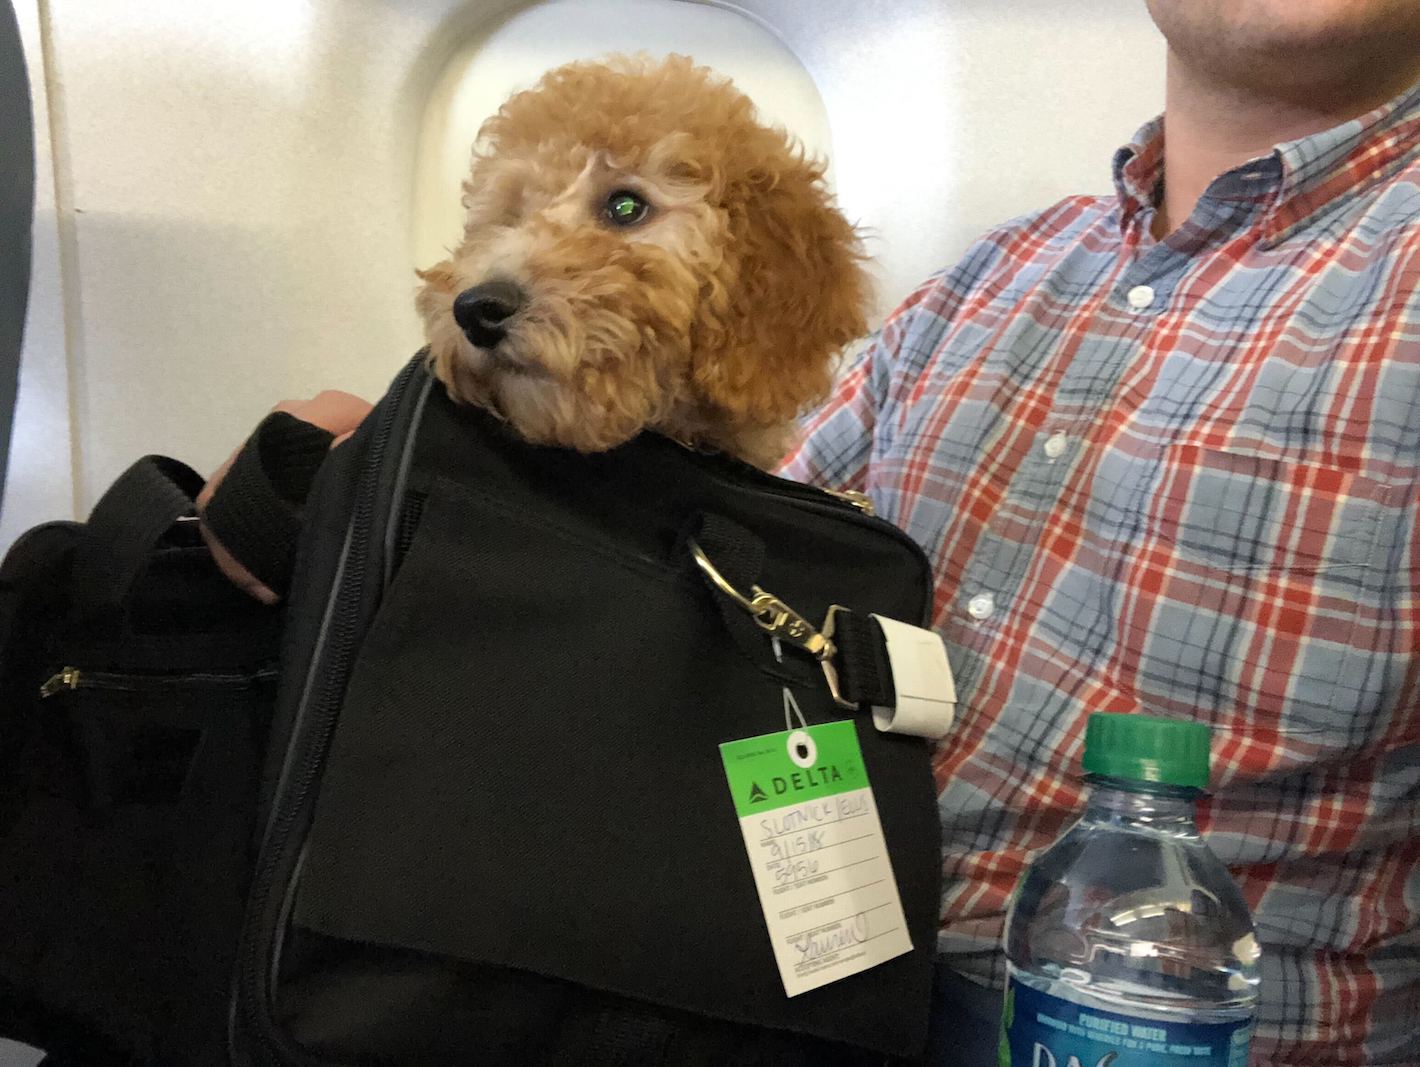 travel on plane with dog